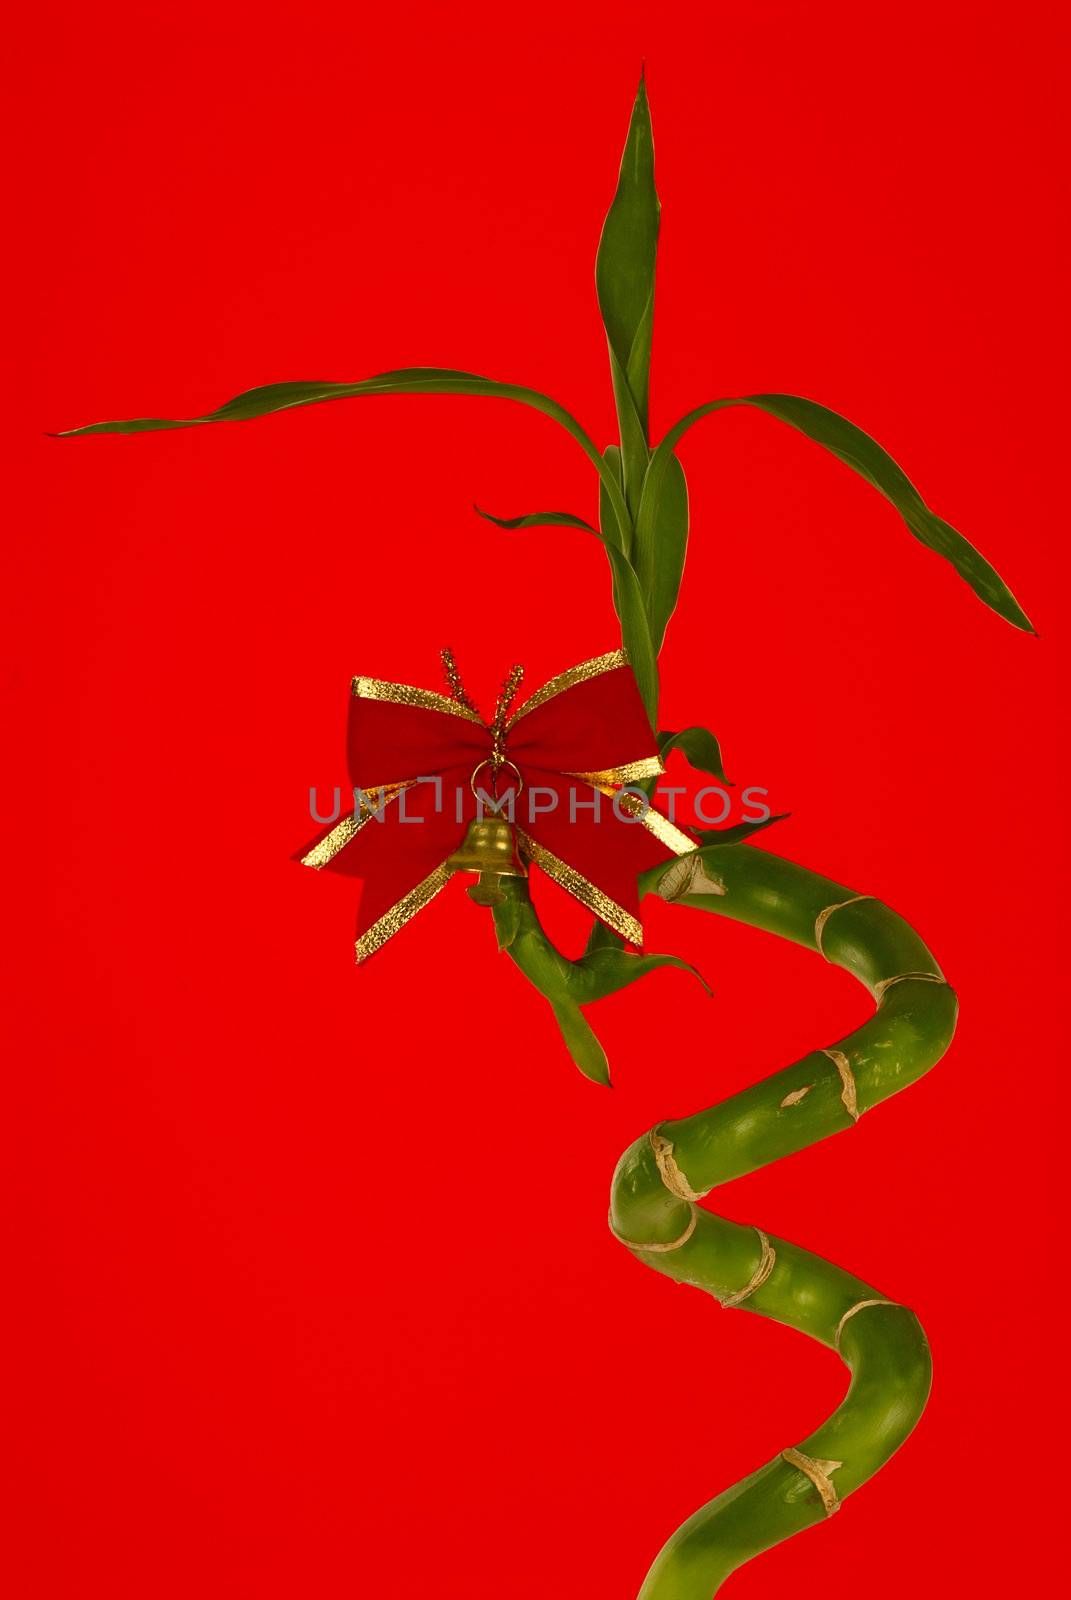 Bamboo on red background by Kamensky